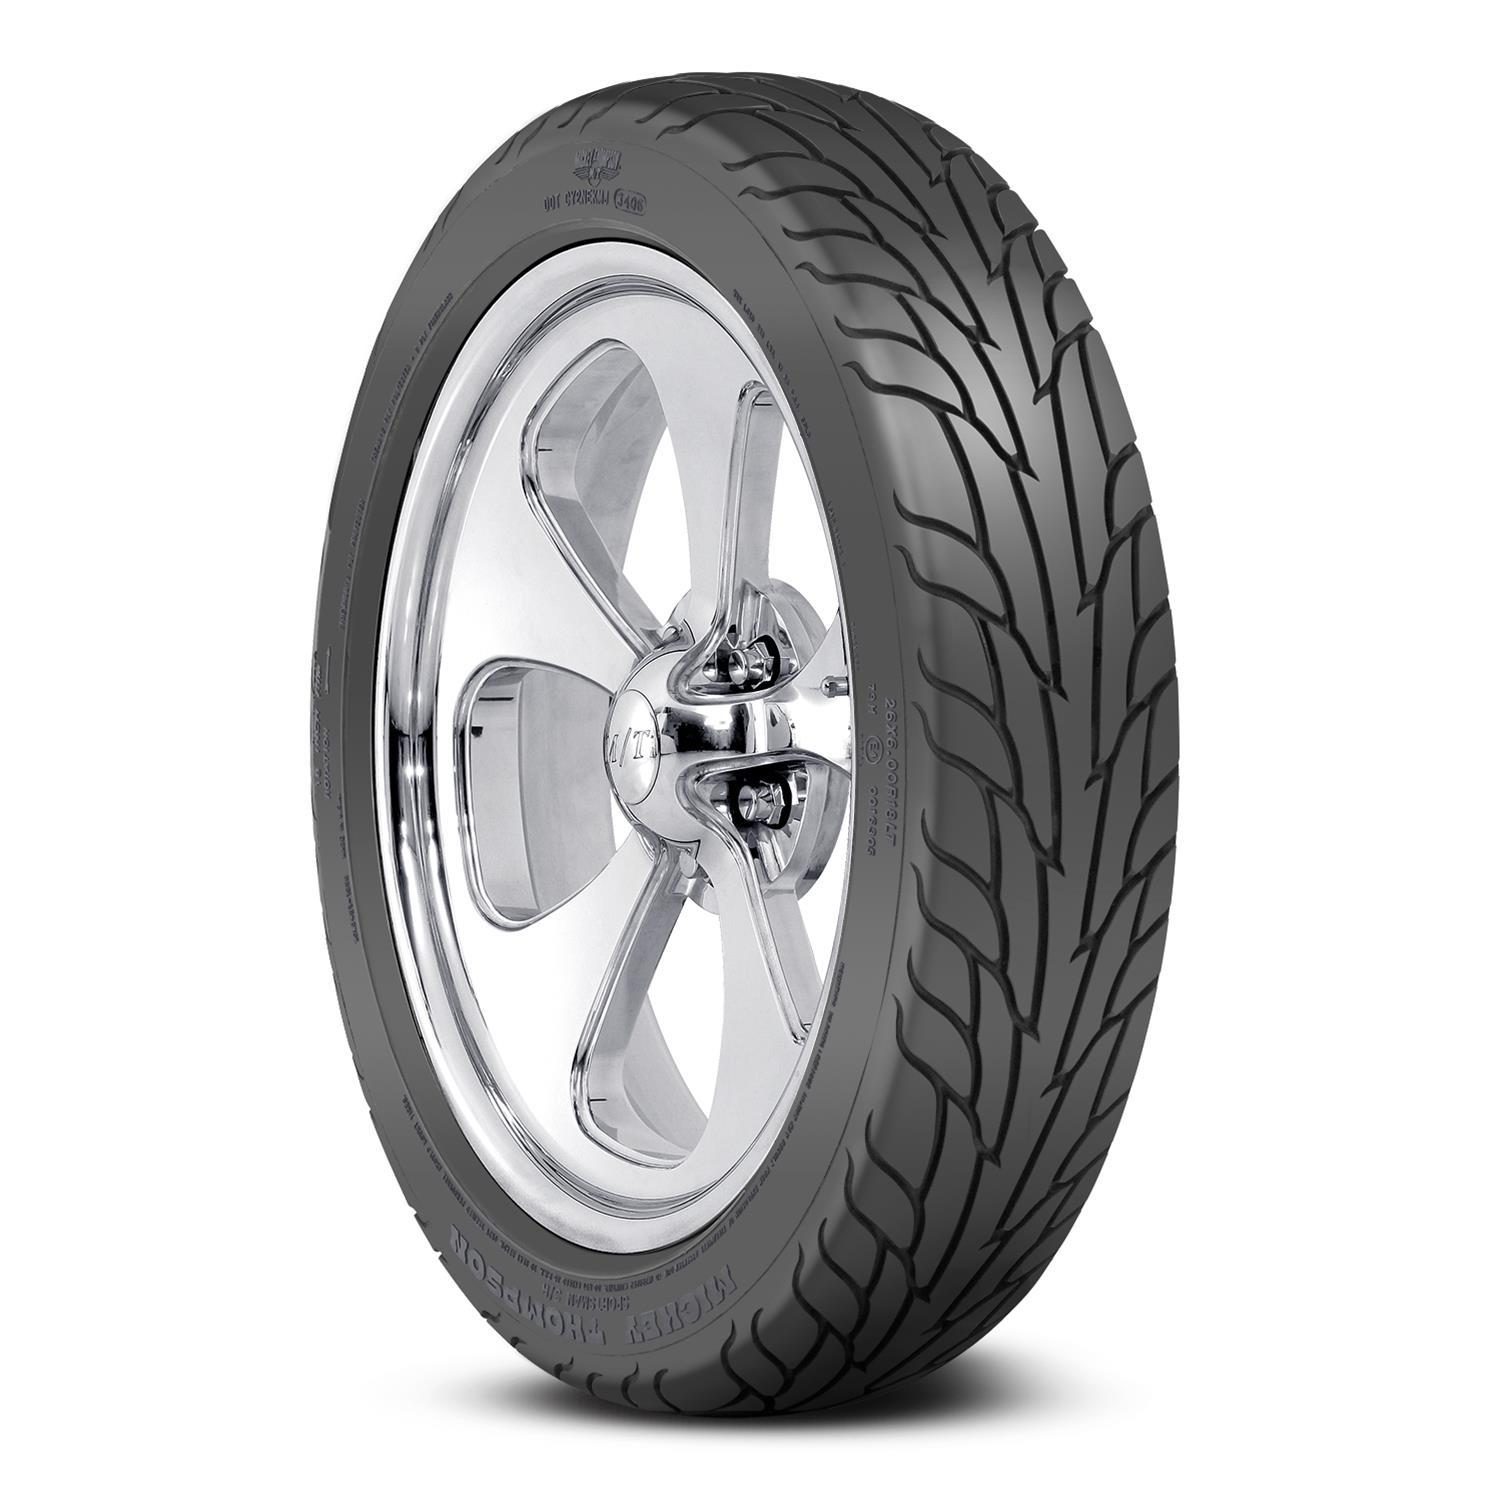 Mickey Thompson 26x6.00R15LT Sportsman S/R Radial Tire Tires and Tubes Tires main image